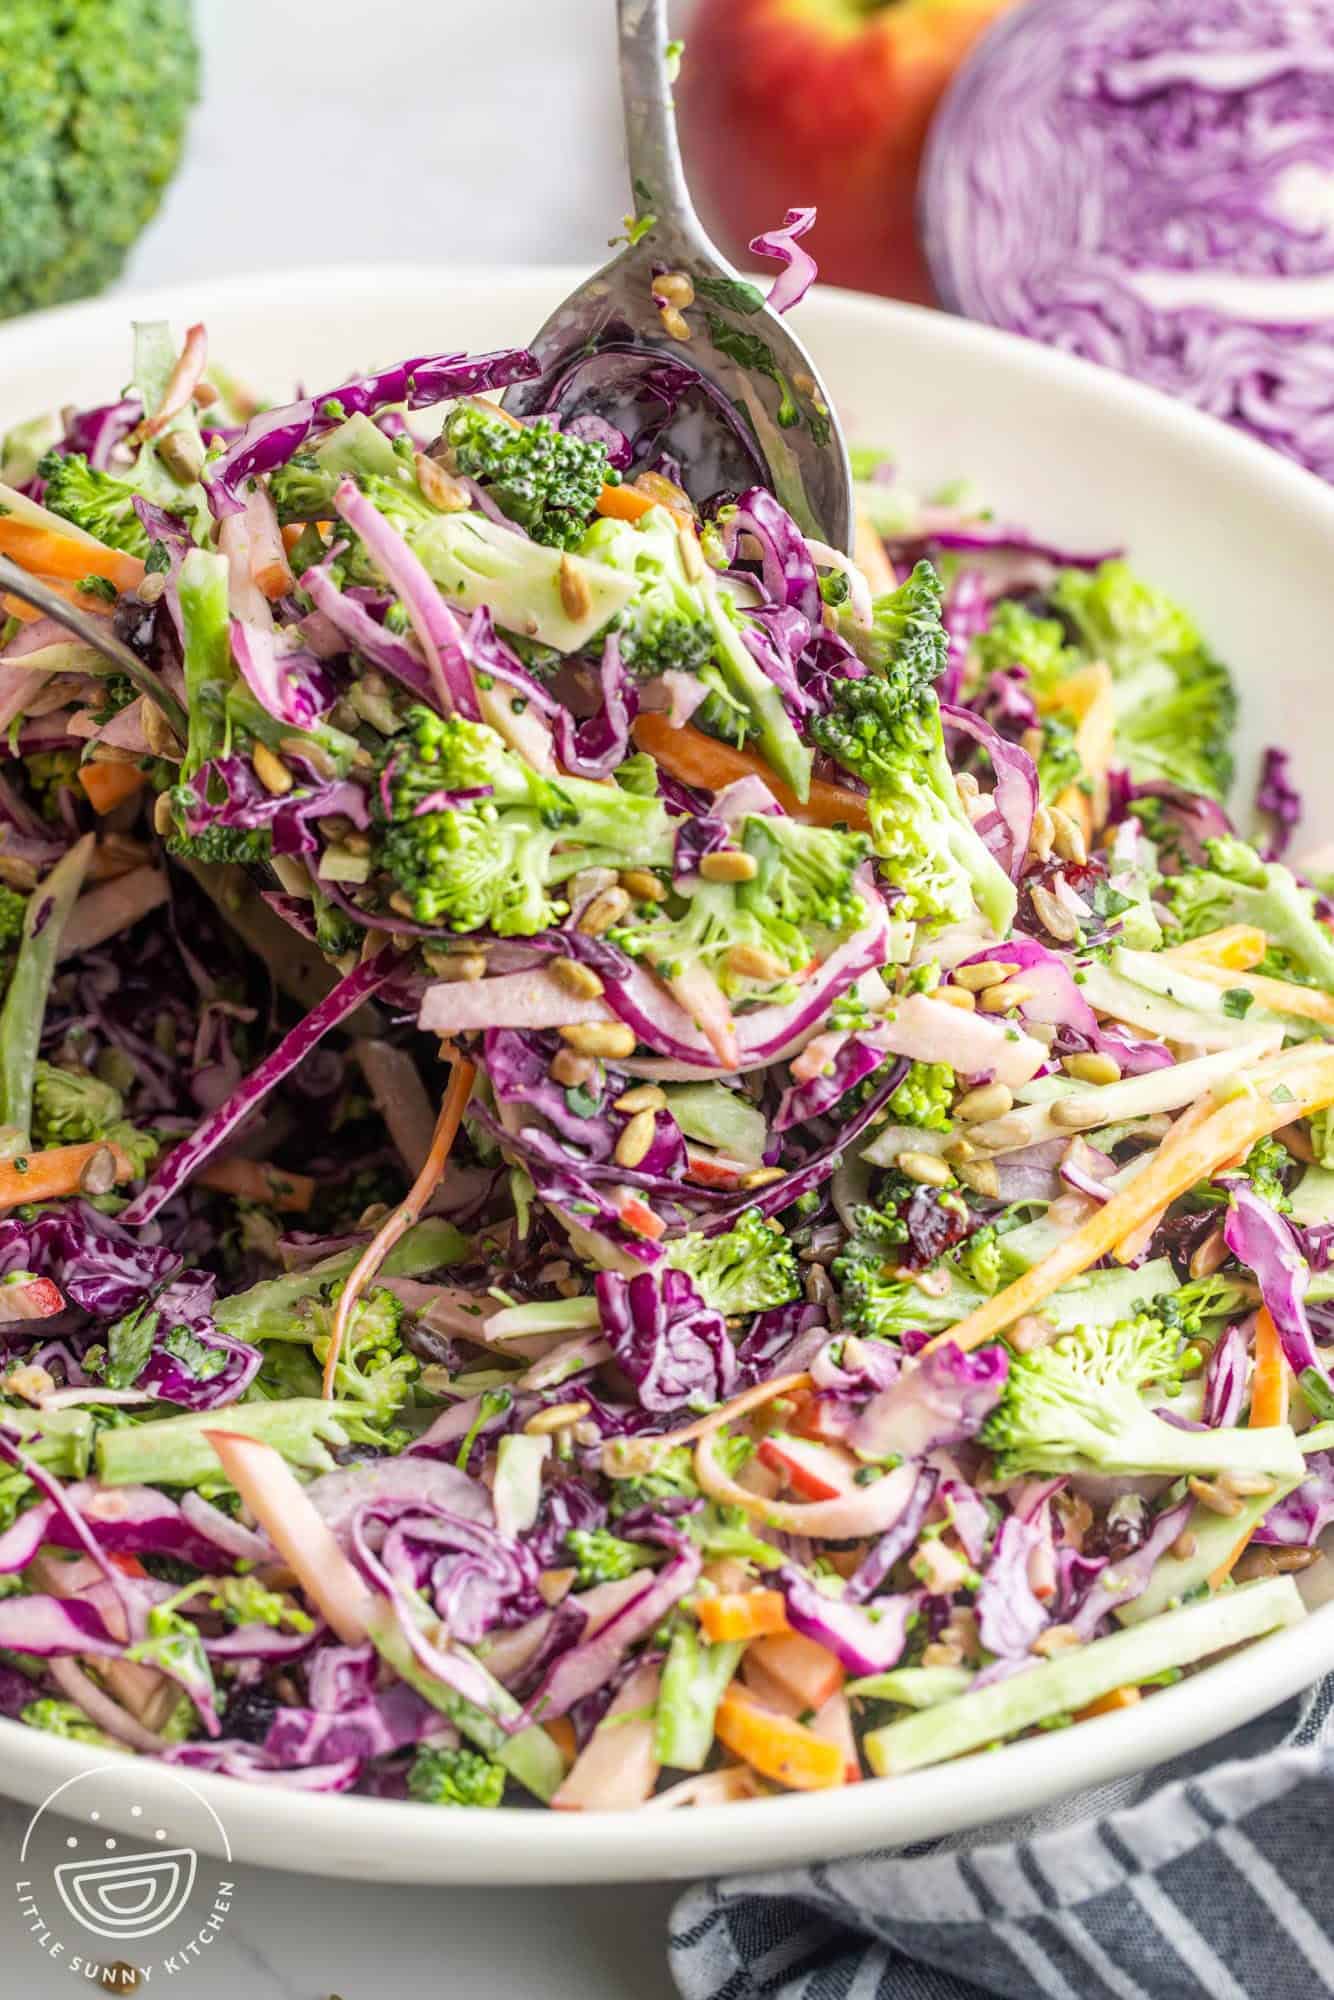 A serving bowl filled with homemade broccoli slaw. A spoon is serving it.